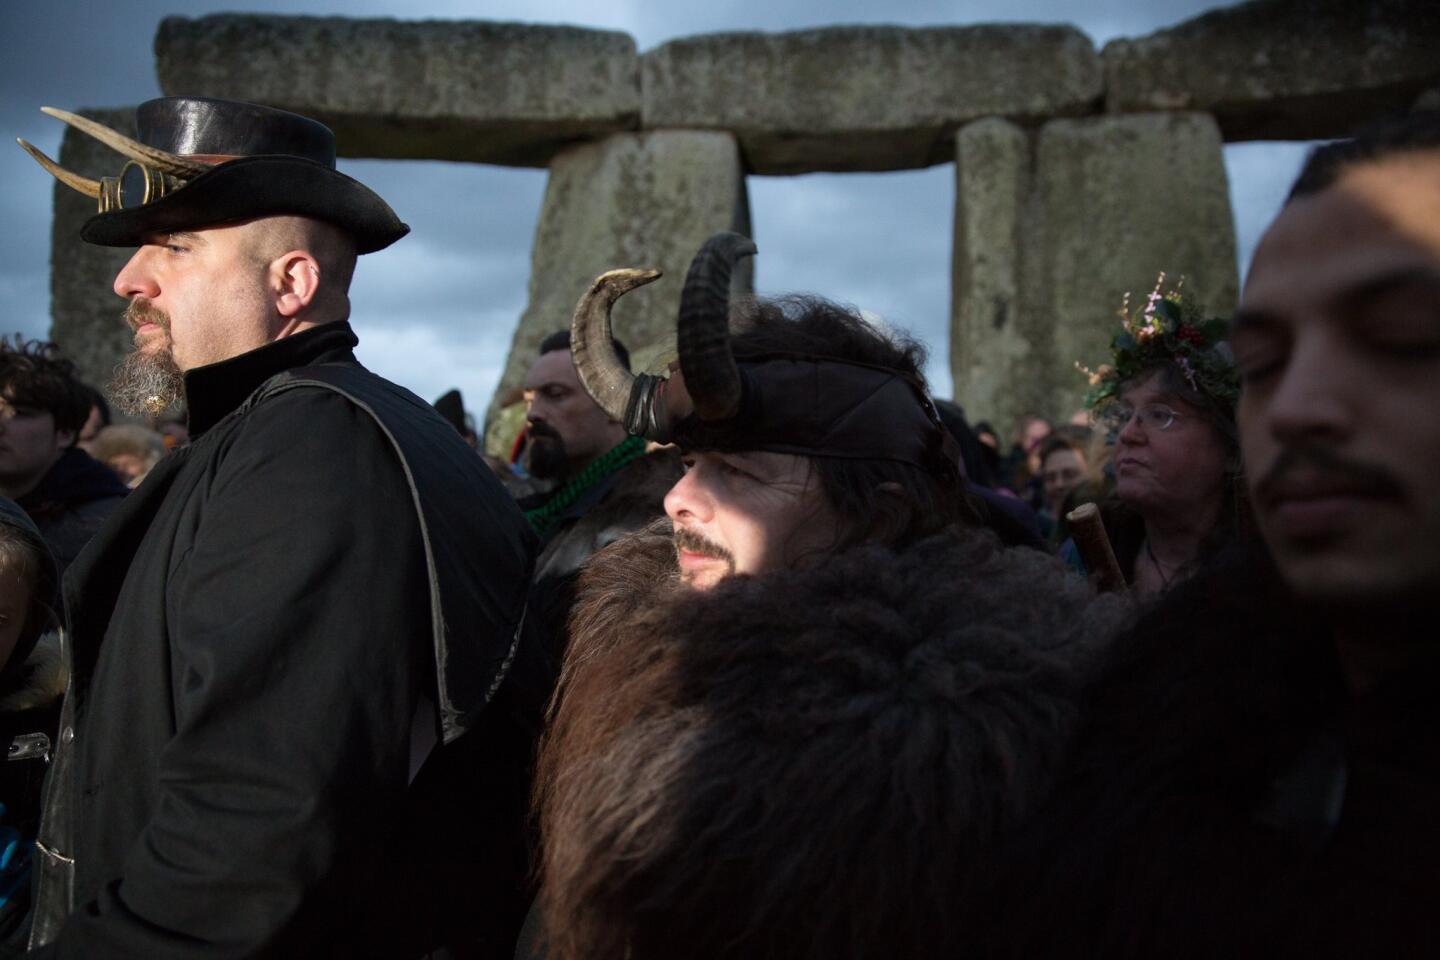 Druids, pagans and revellers gather at Stonehenge, hoping to see the sun rise, as they take part in a winter solstice ceremony Dec. 22, 2015, in Wiltshire, England.